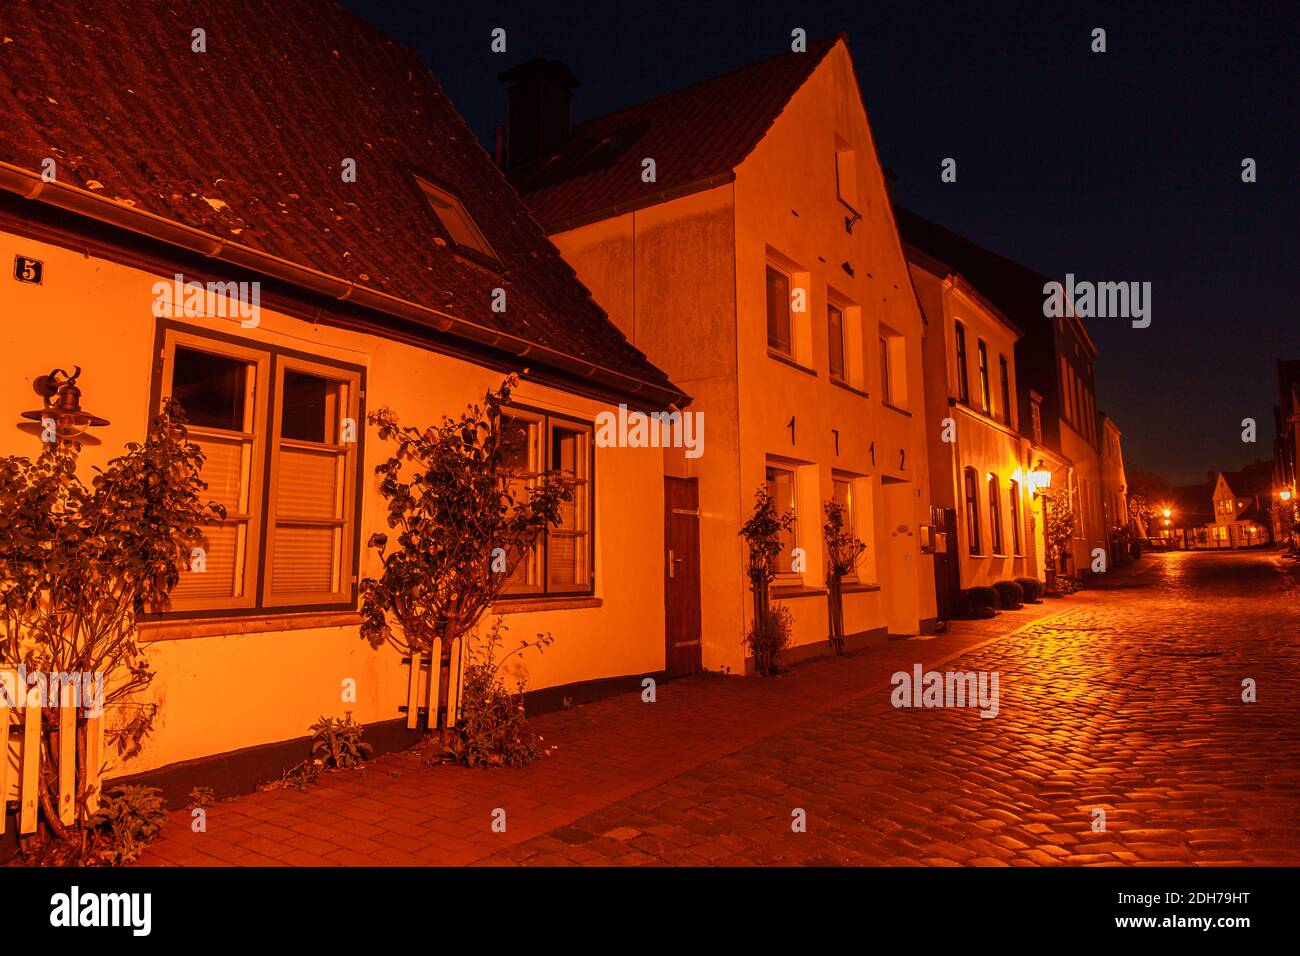 The Holm, traditional living quarters of fishermen, town of Schleswig, Schlei area, Baltic Sea, Schleswig-Holstein, North Germany, Central Europe Stock Photo